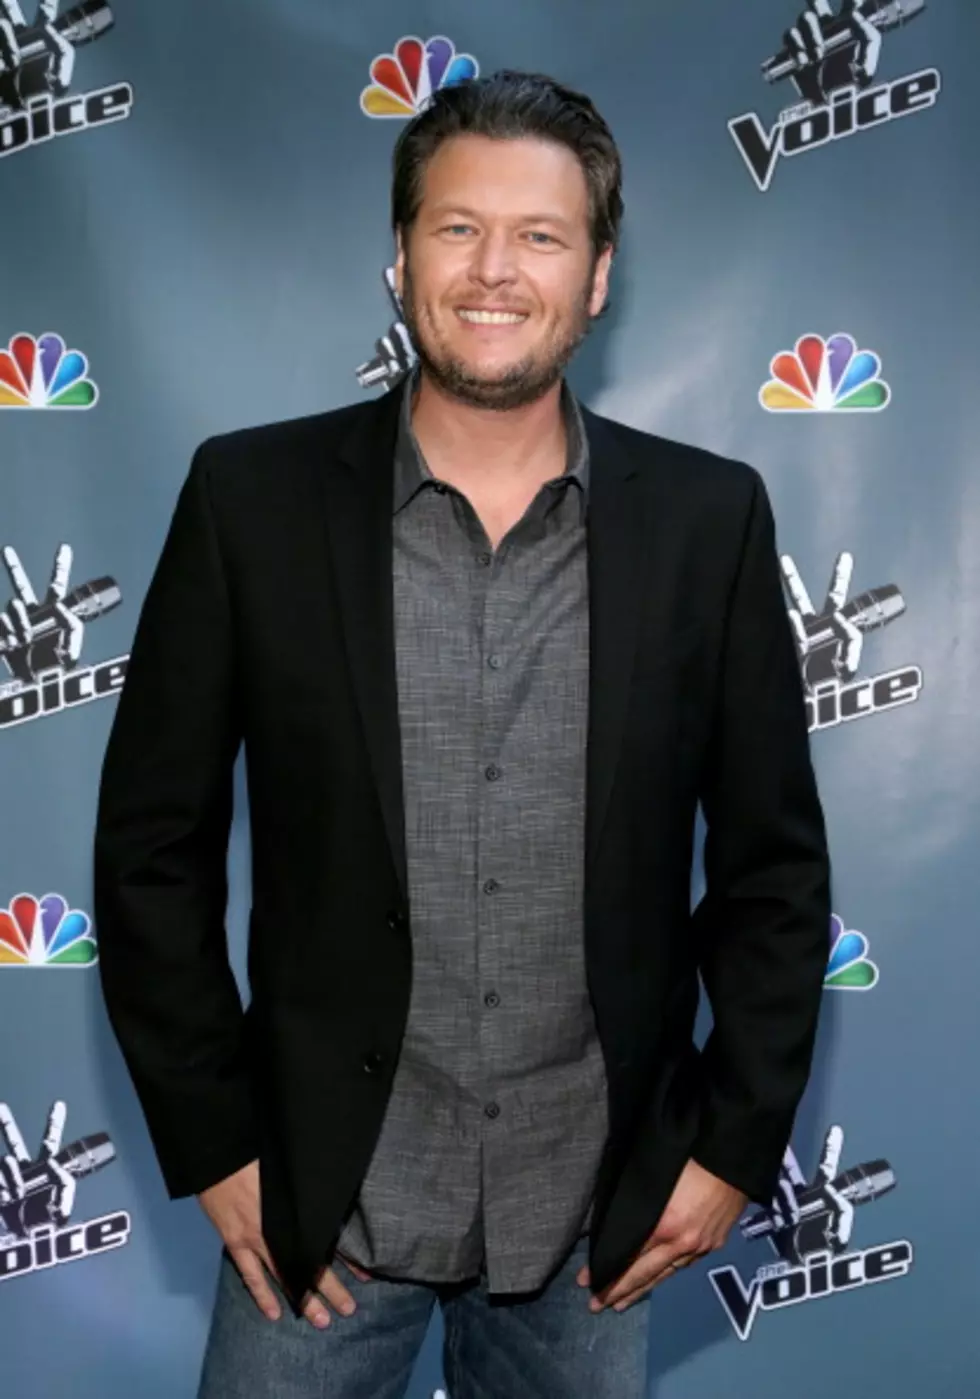 Blake Shelton Performs with Cassadee Pope (Video)